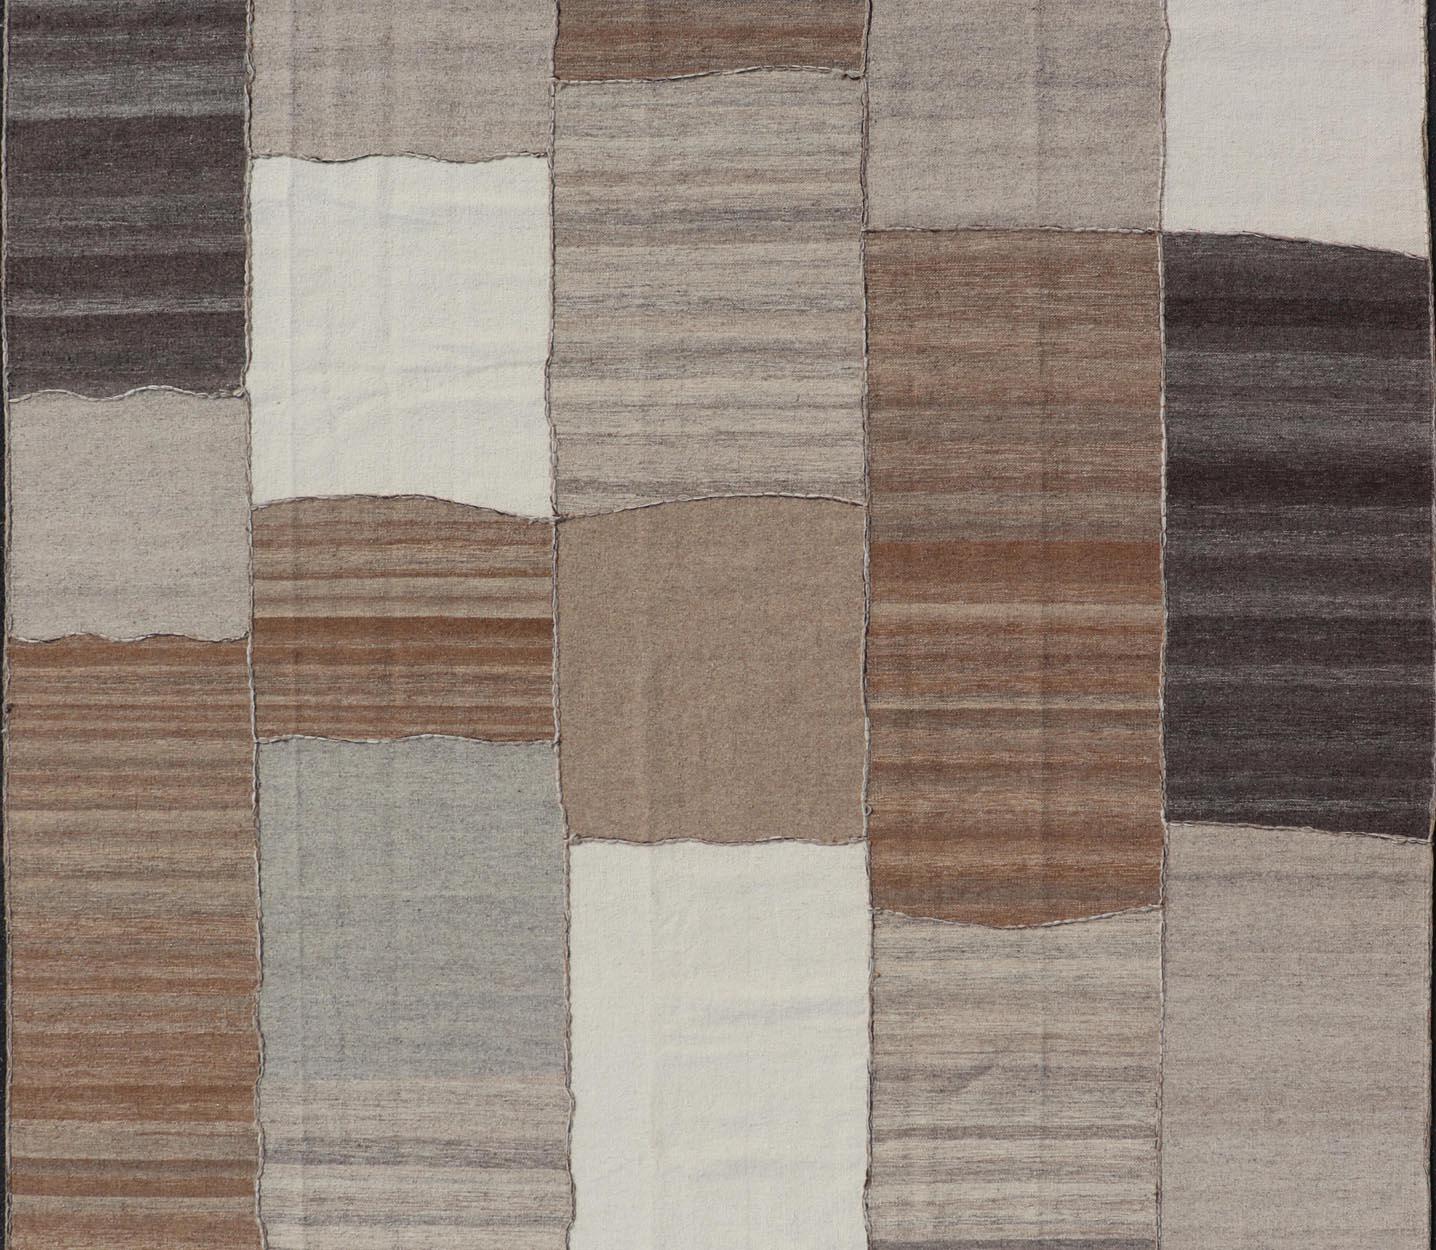 Modern Kilim Rug in Multi-Panel Striped Design with Brown, Gray, White and Taupe For Sale 4